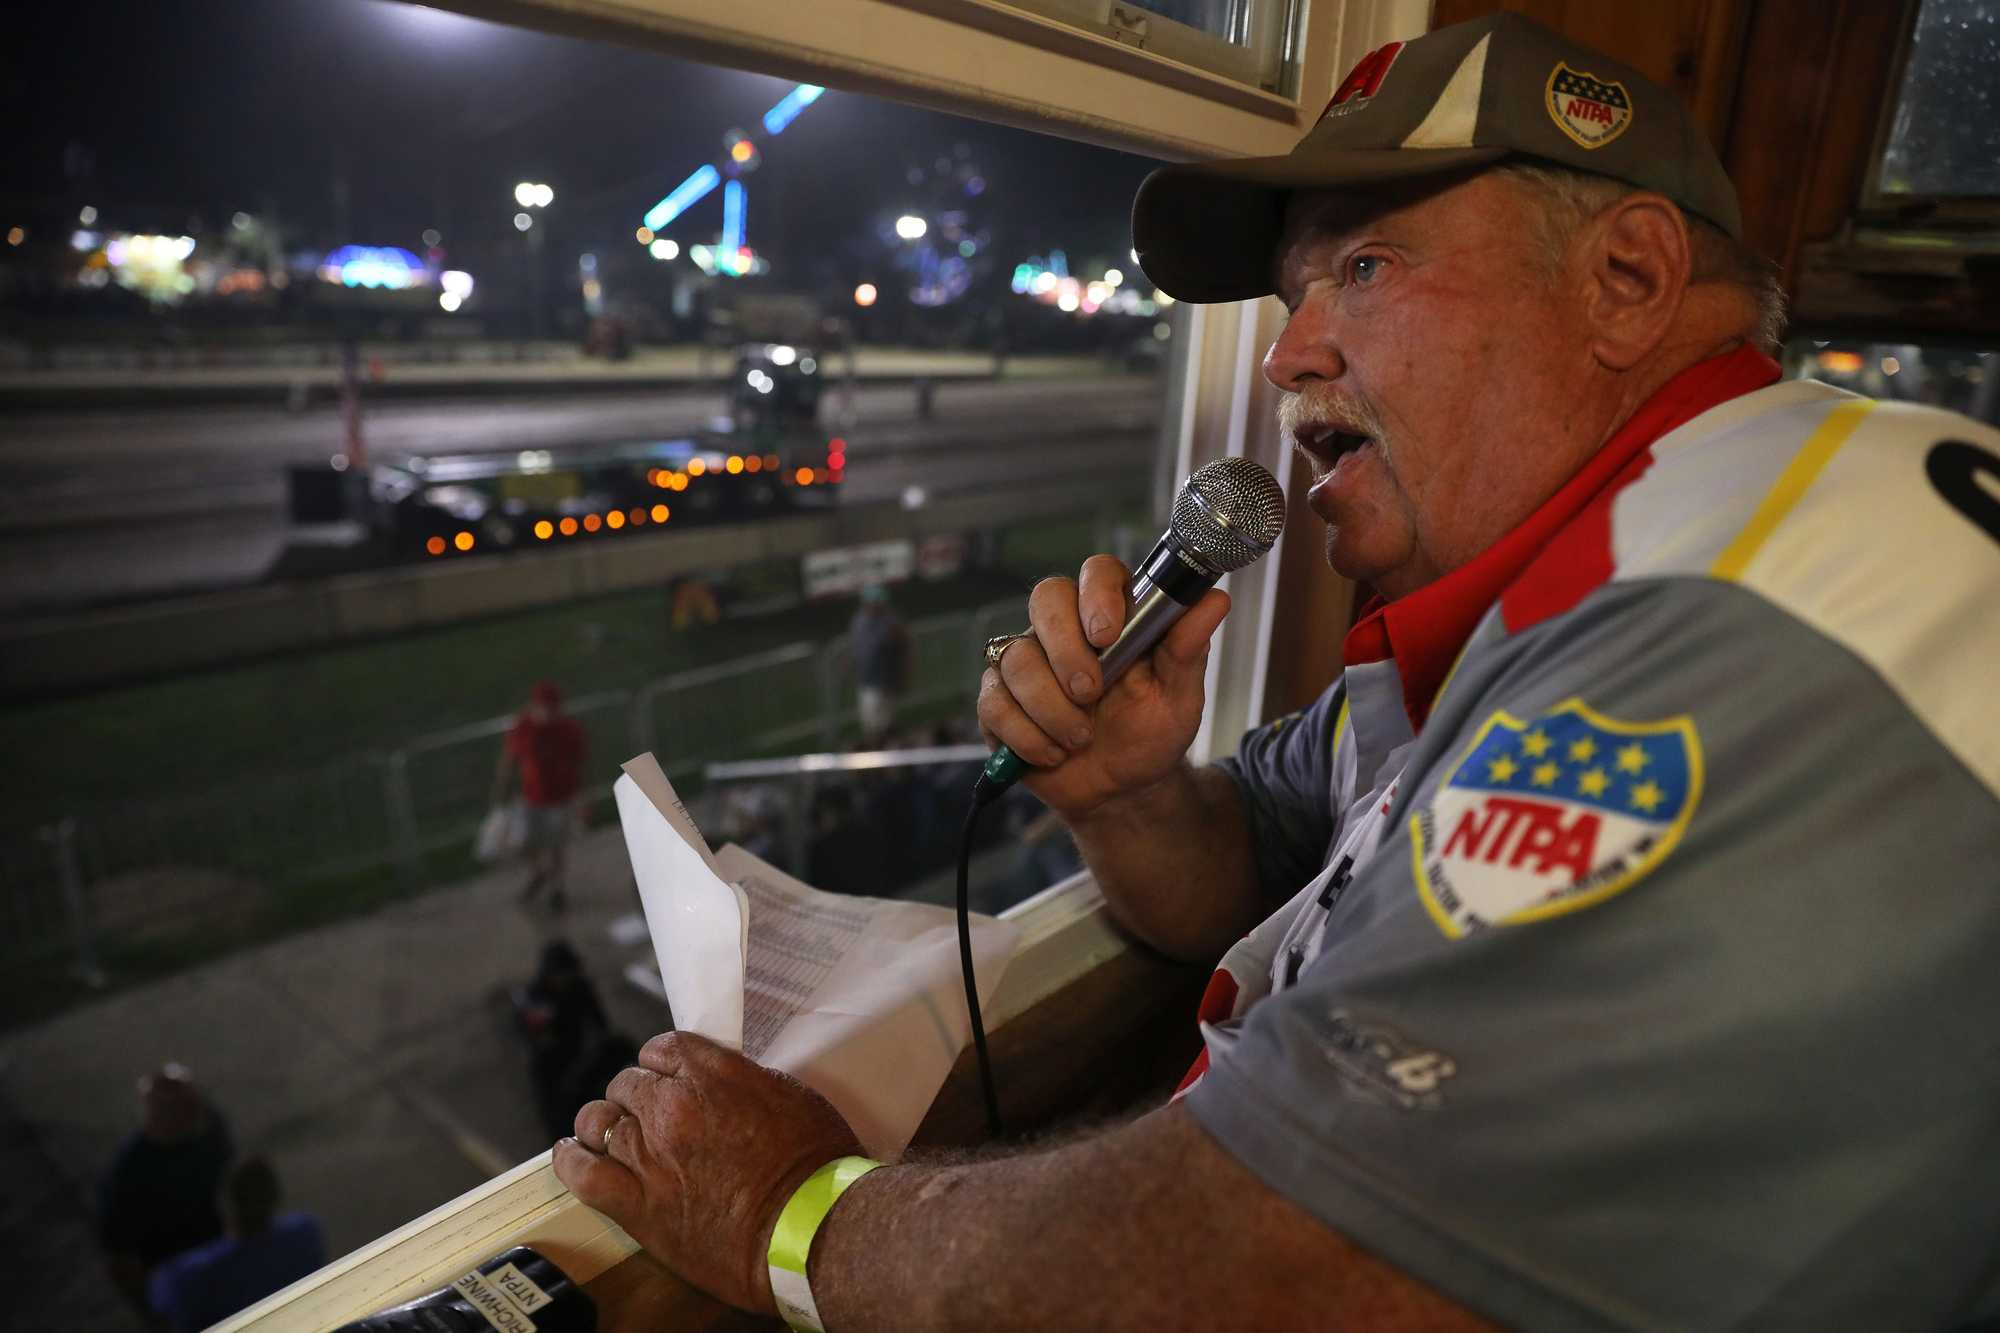 Larry Richwine, of Brownsburg, Ind., is in his 29th season as an announcer at the fair. 